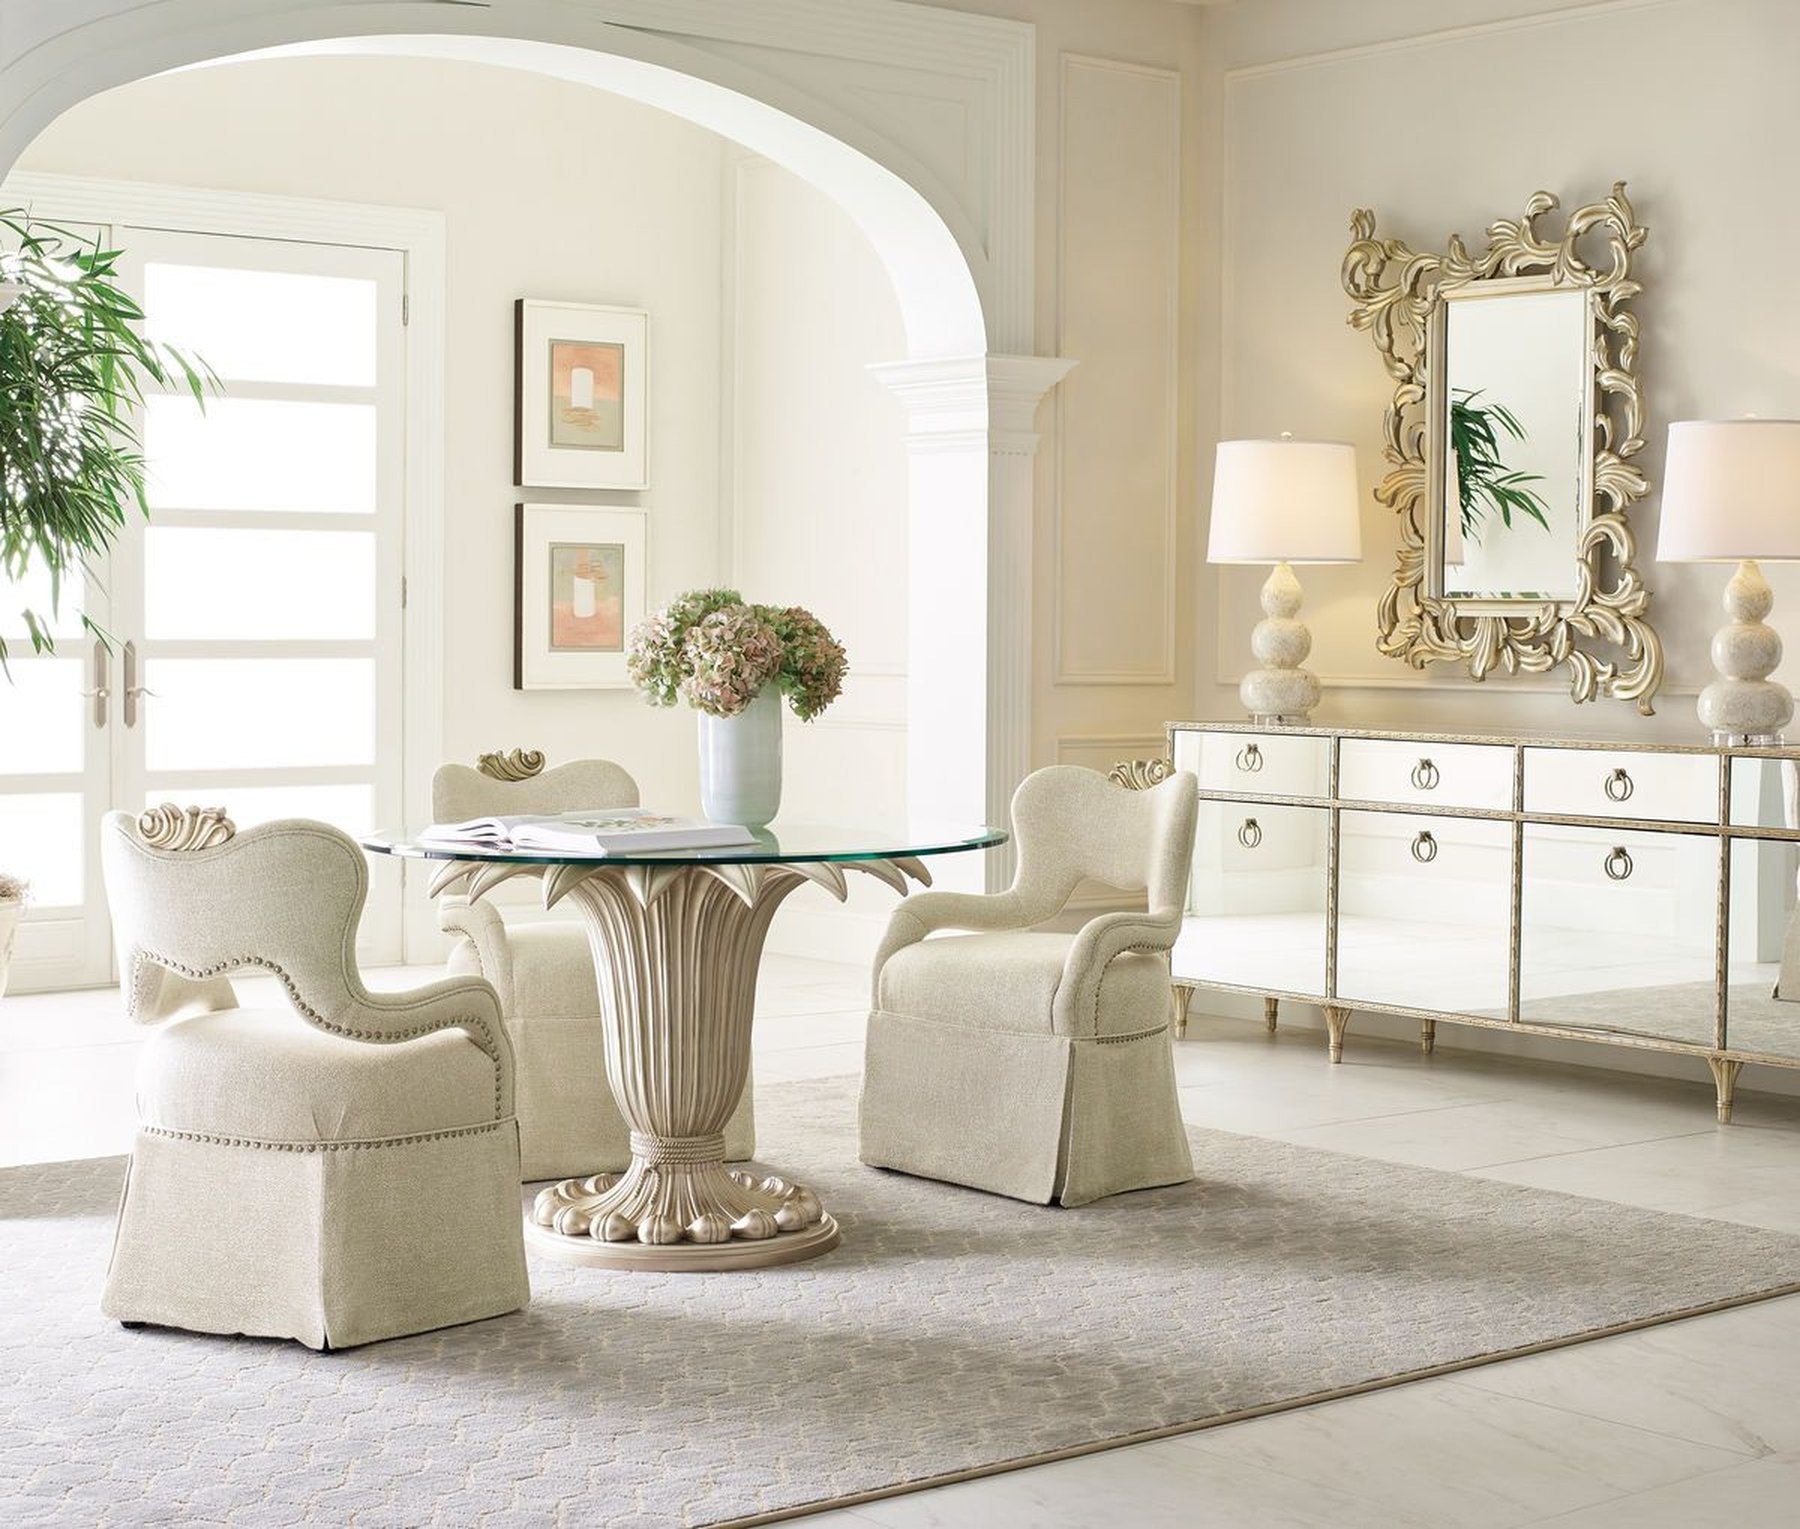 Ways To Decorate Your Home With The Italian Furniture